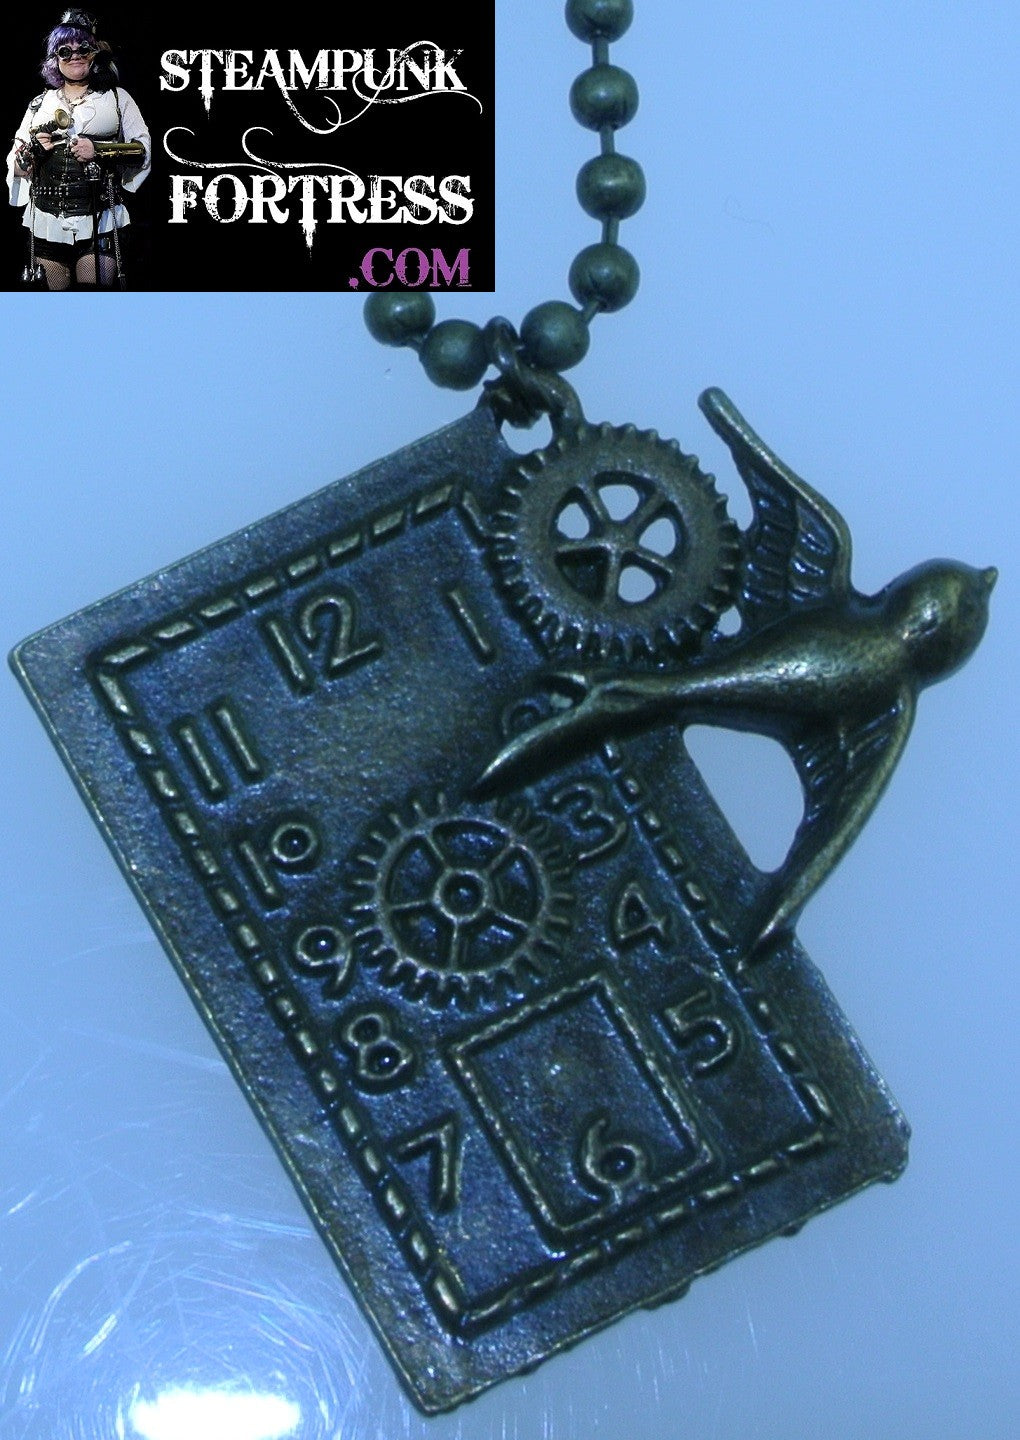 BRASS FACE RECTANGLE BIRD FLYING GEARS NECKLACE SET AVAILABLE STARR WILDE STEAMPUNK FORTRESS